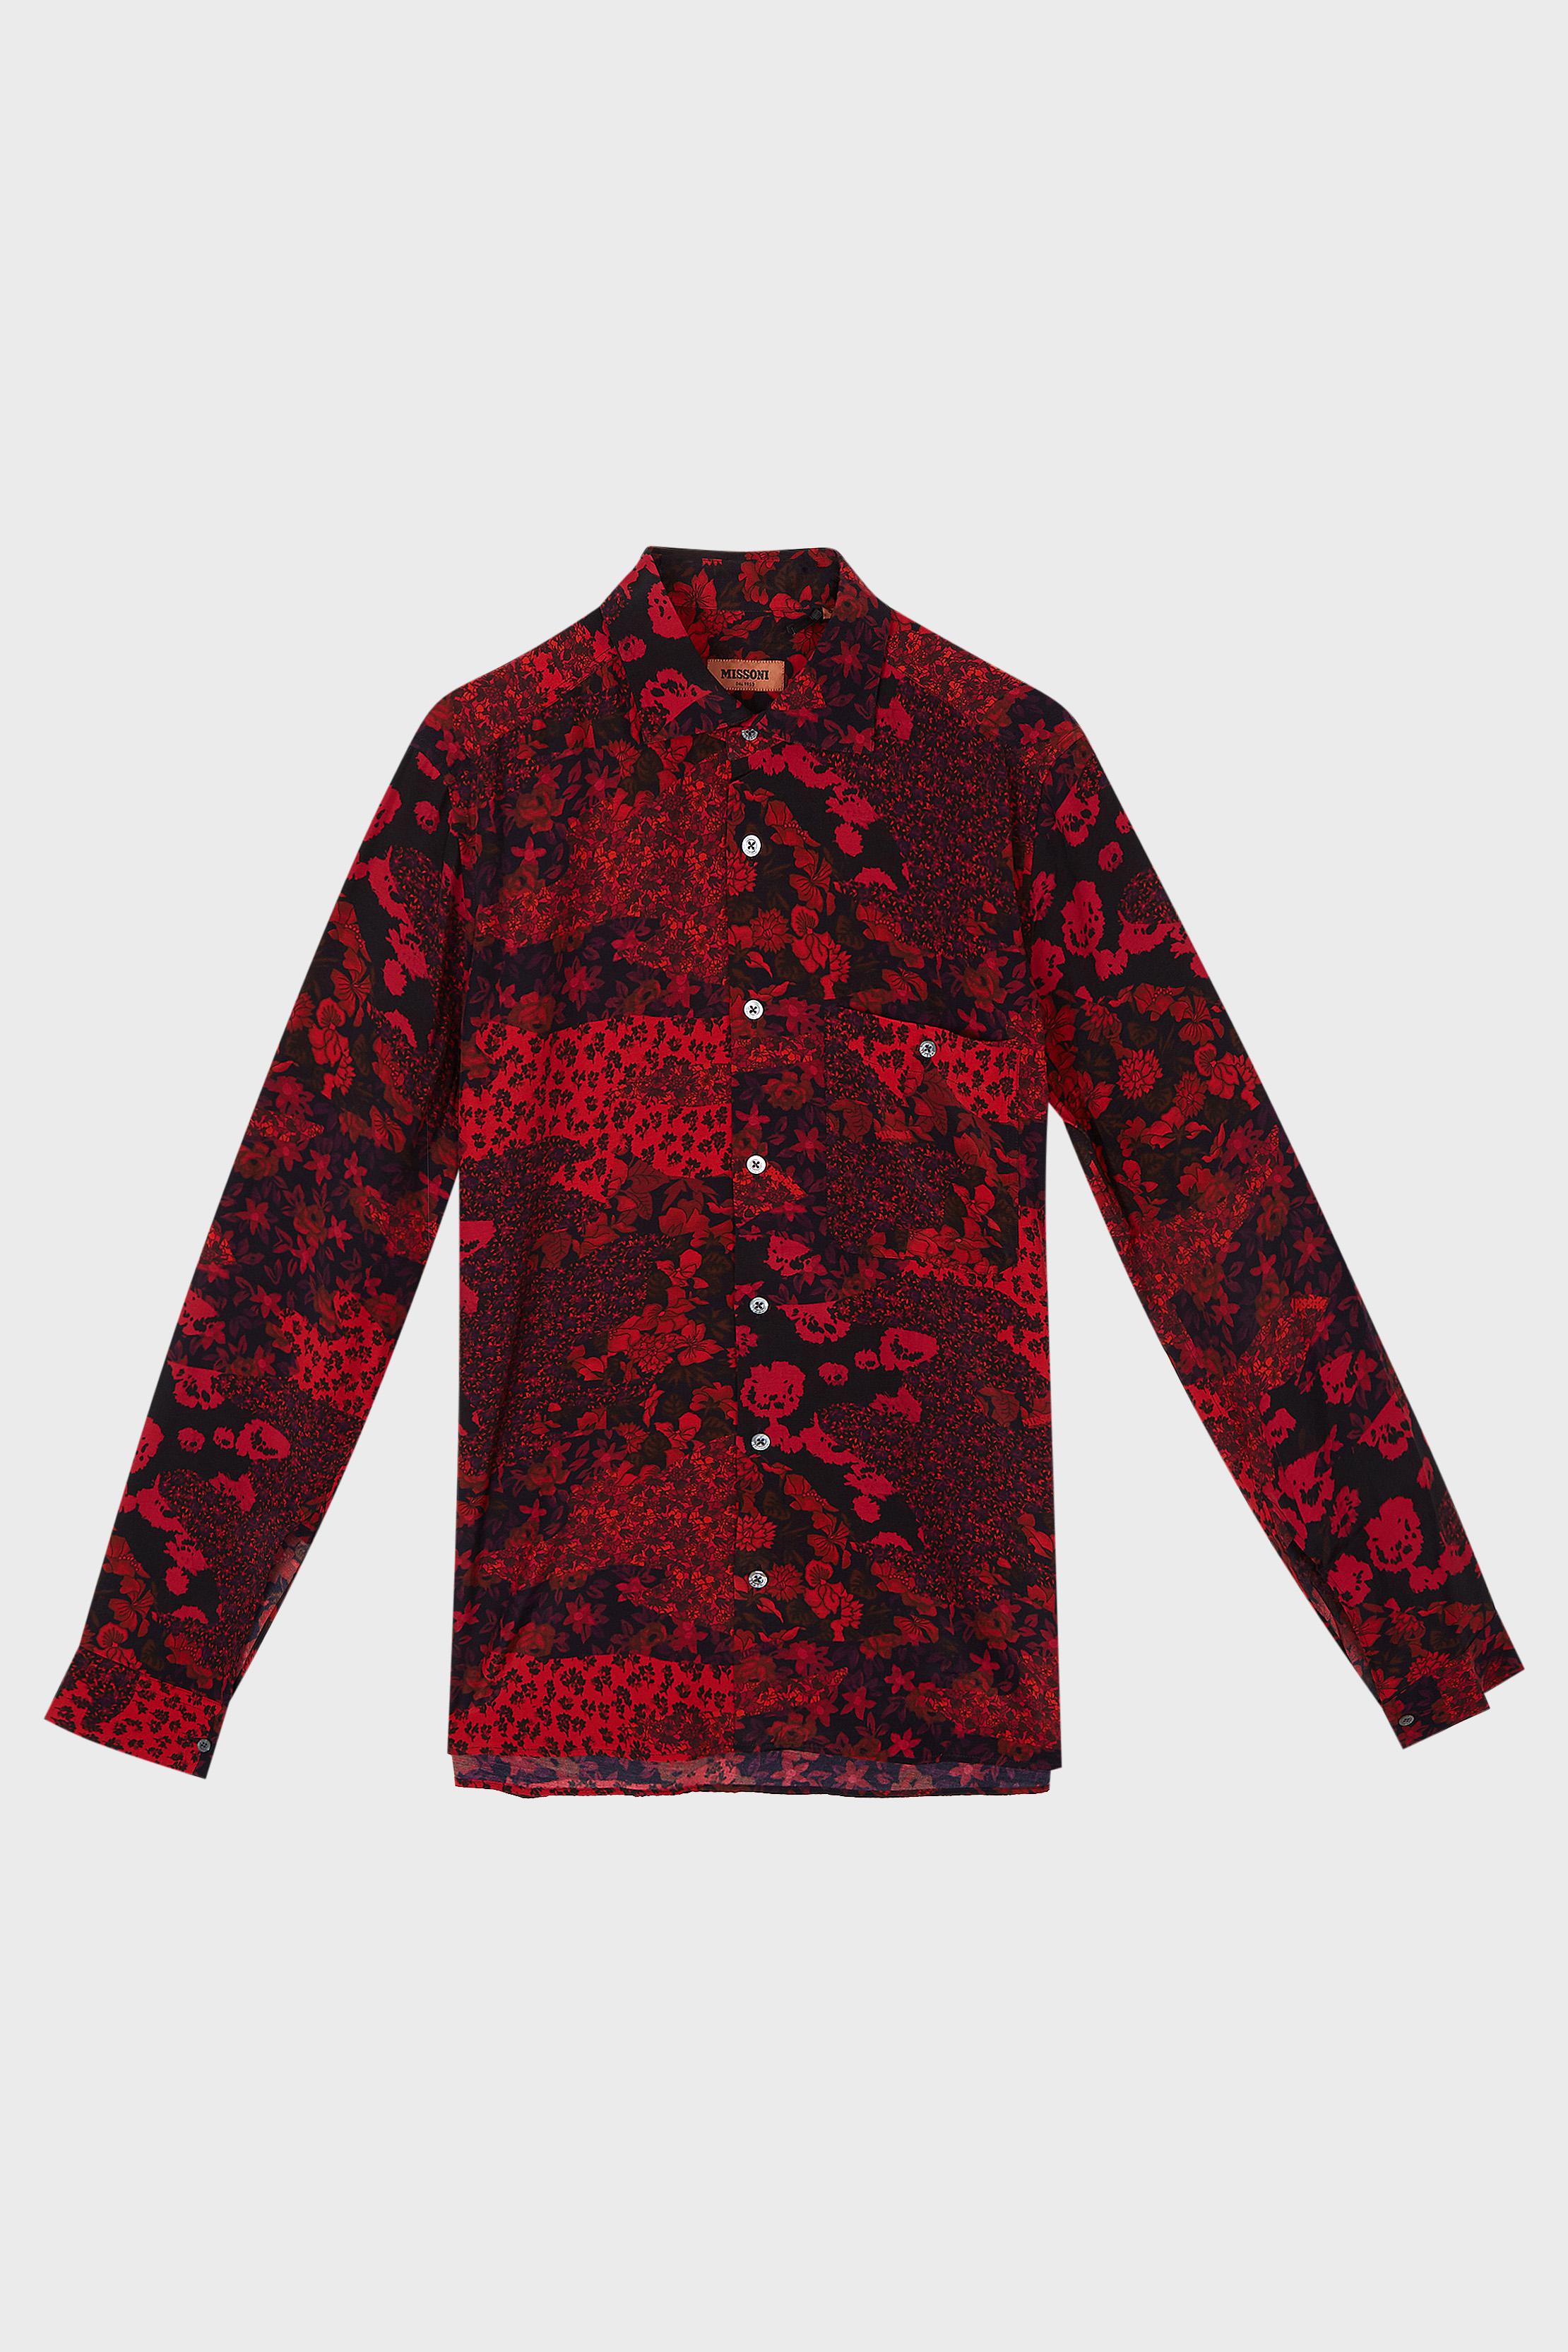 Missoni Floral Shirt in Red for Men - Lyst